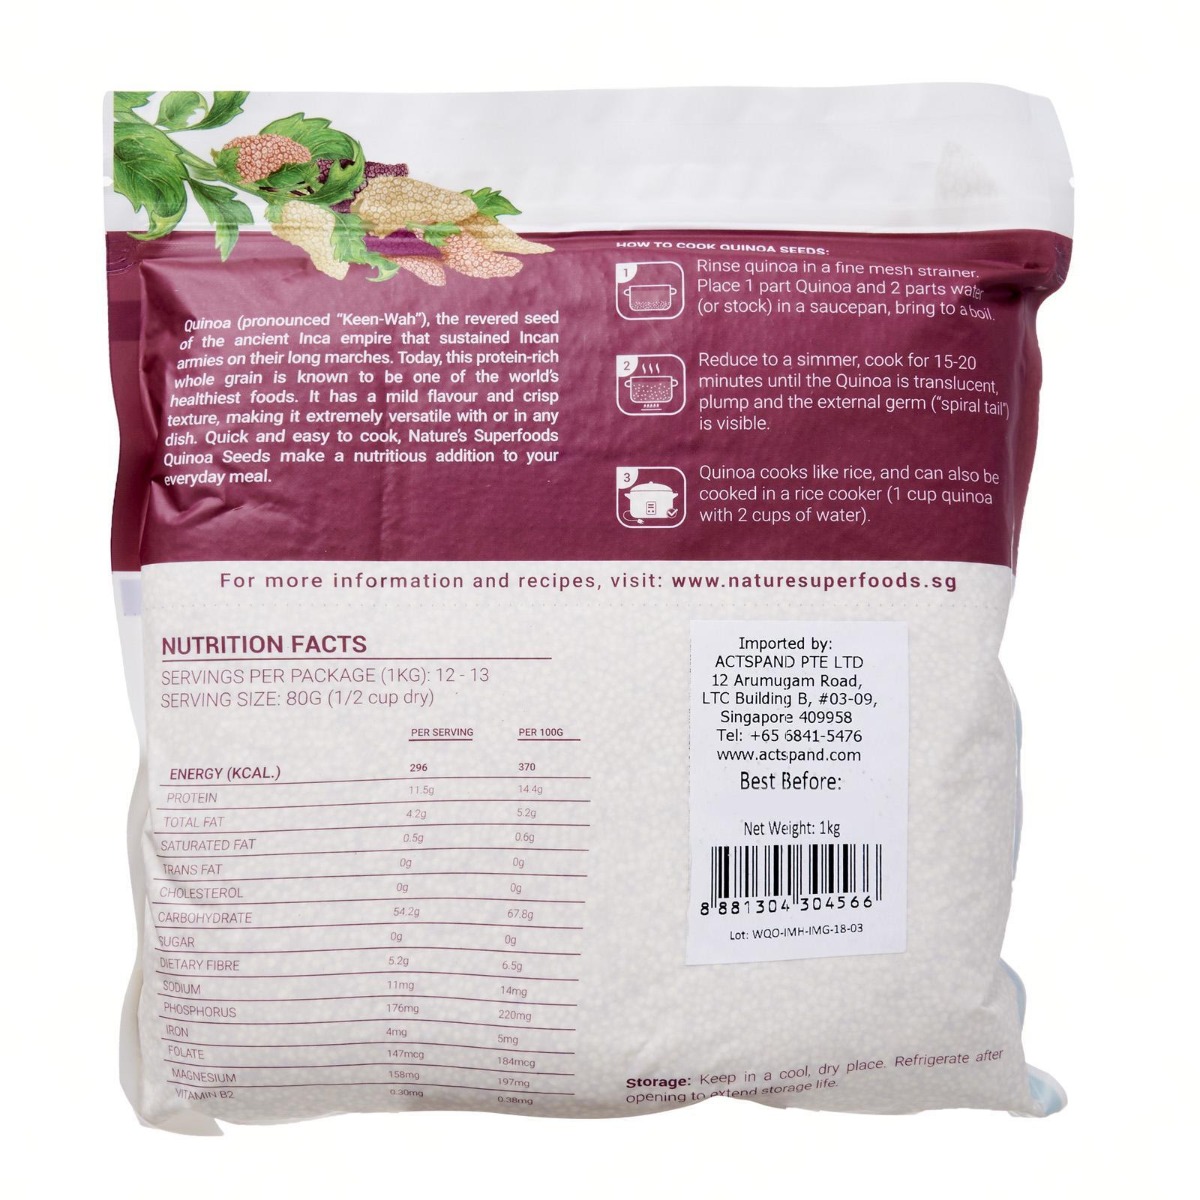 Organic White Quinoa Seeds-1kg resealable pack back